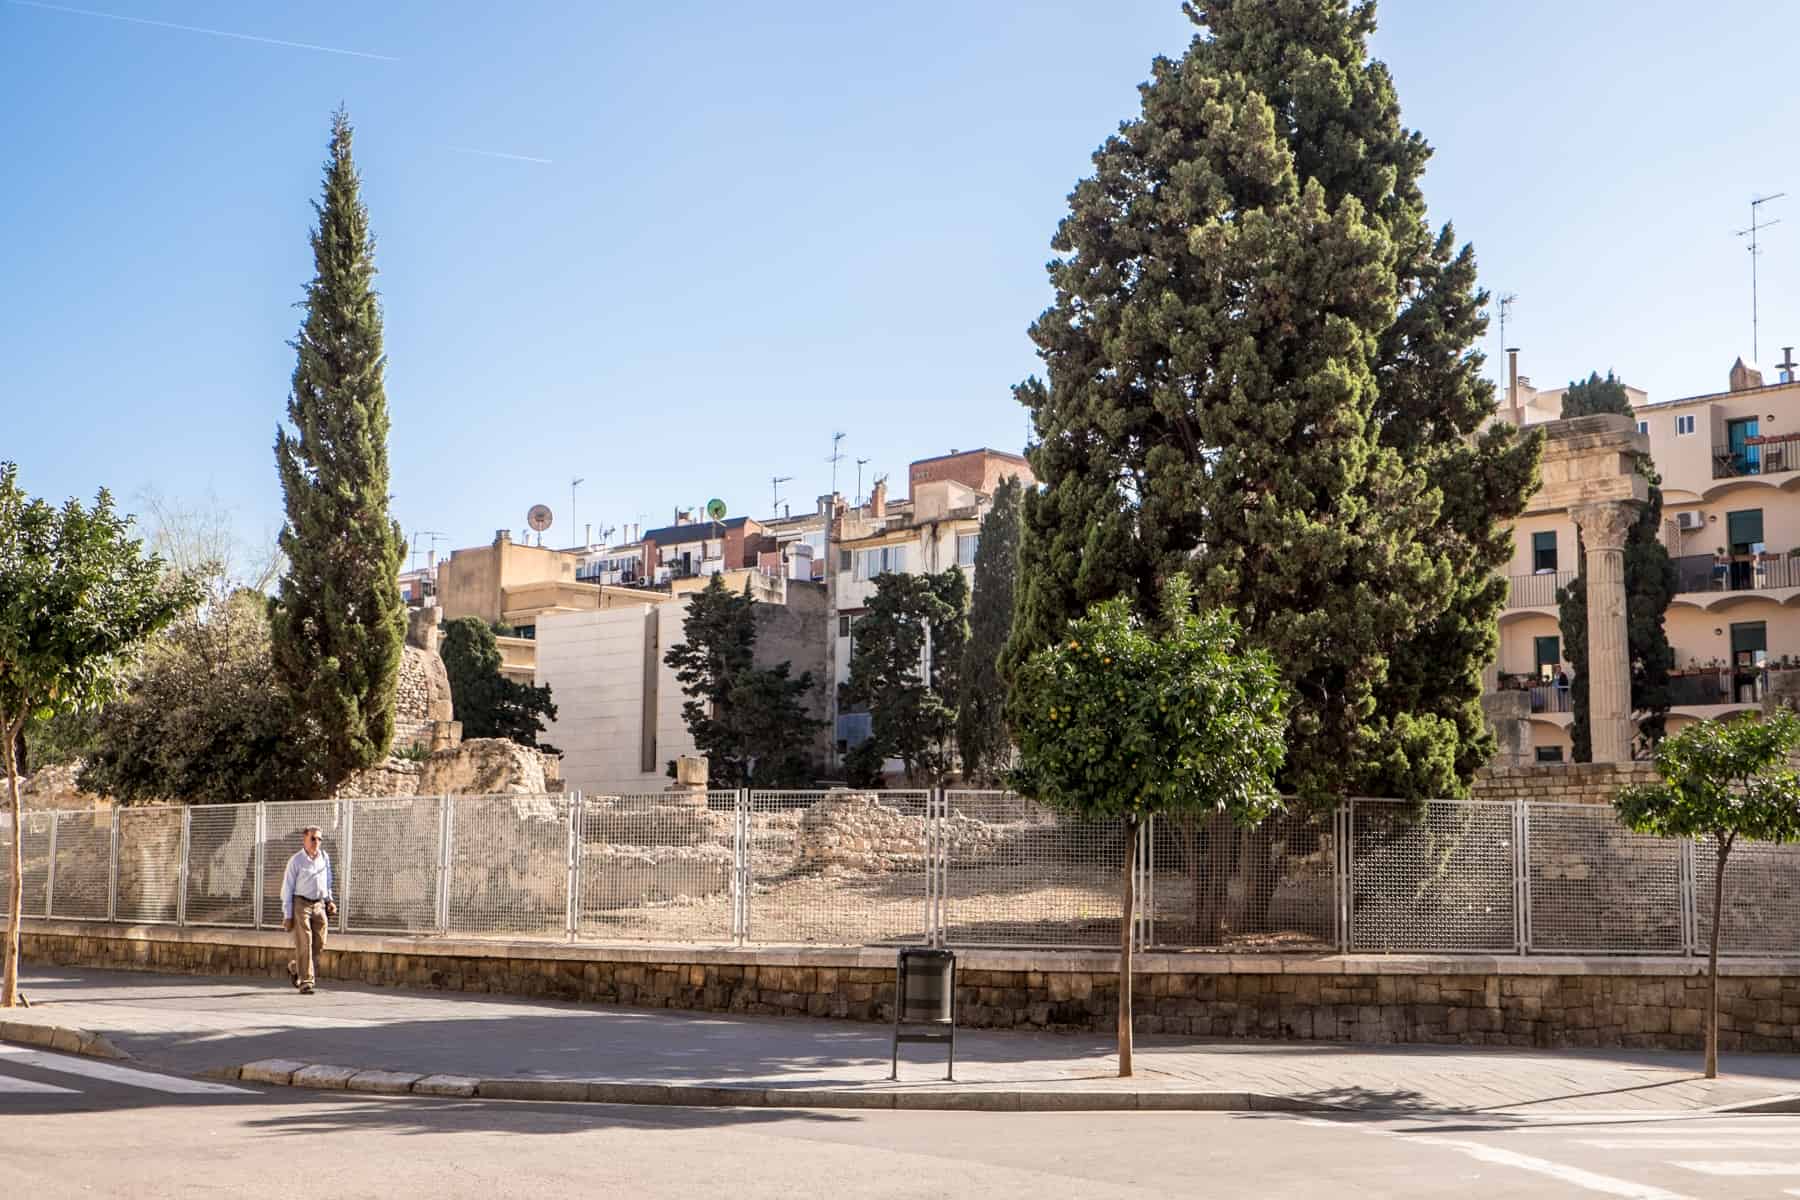 A man in a white shirt walks past a parkland of trees filled with the roman ruins of a square and temple column in Tarragona, Spain